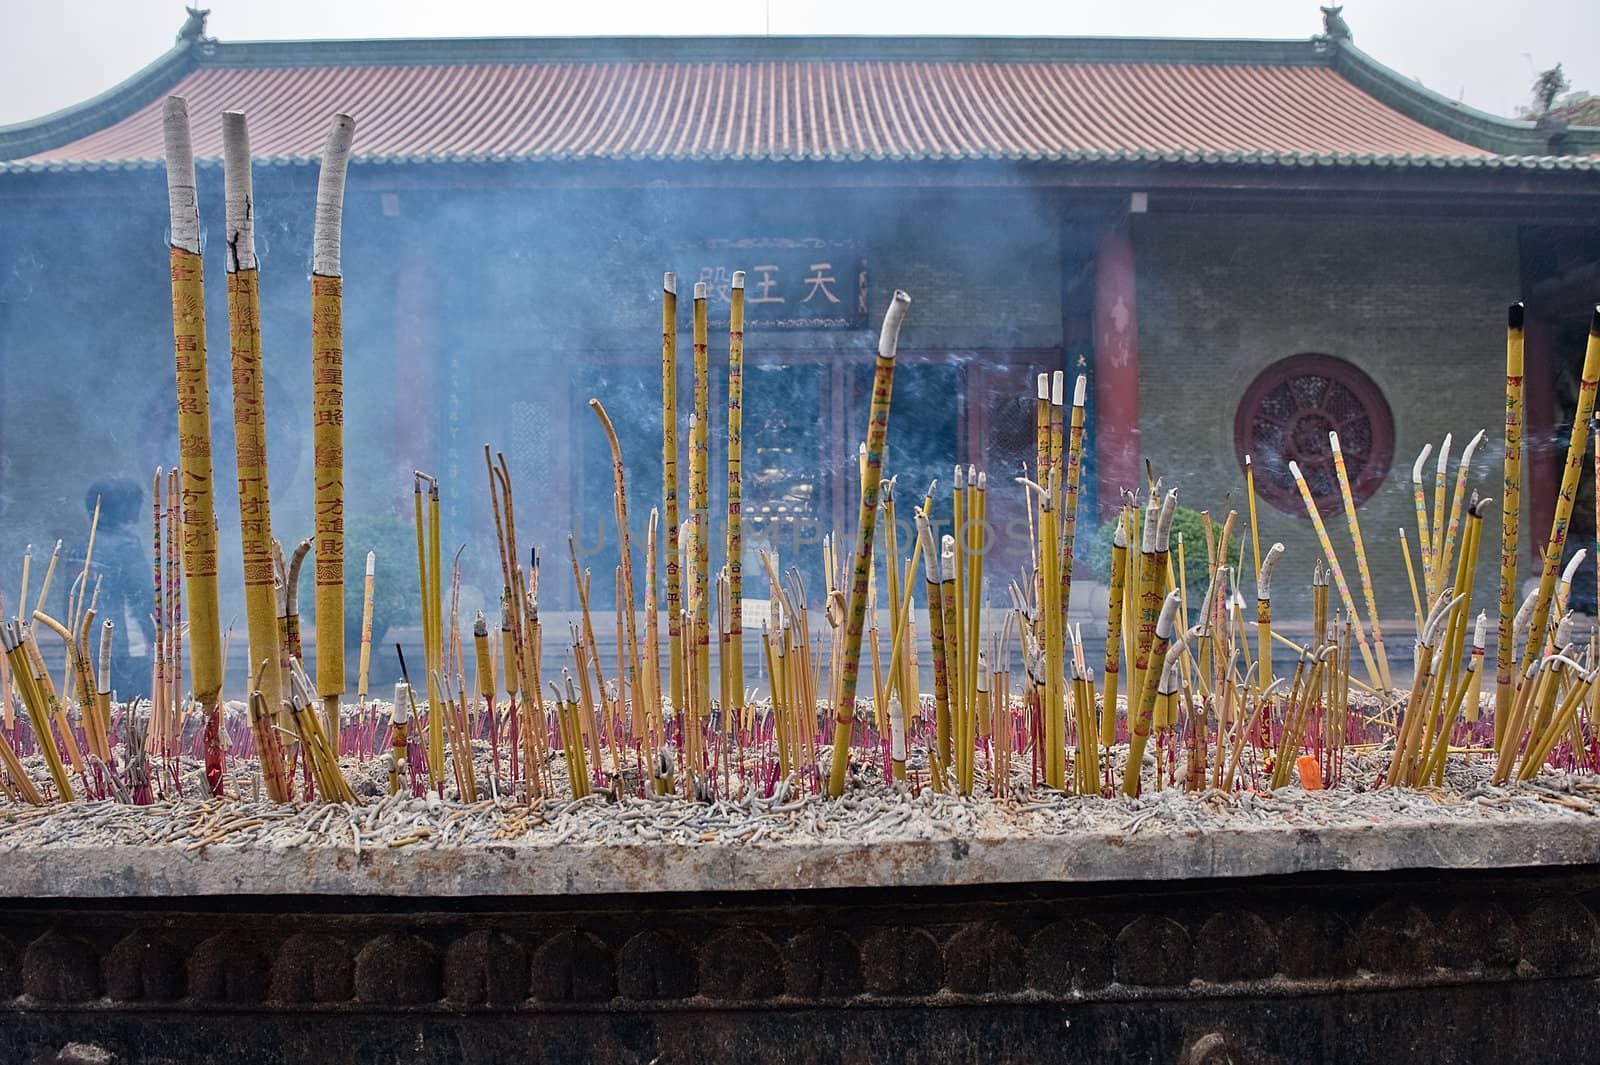 Baolin Temple incense burning by Marcus